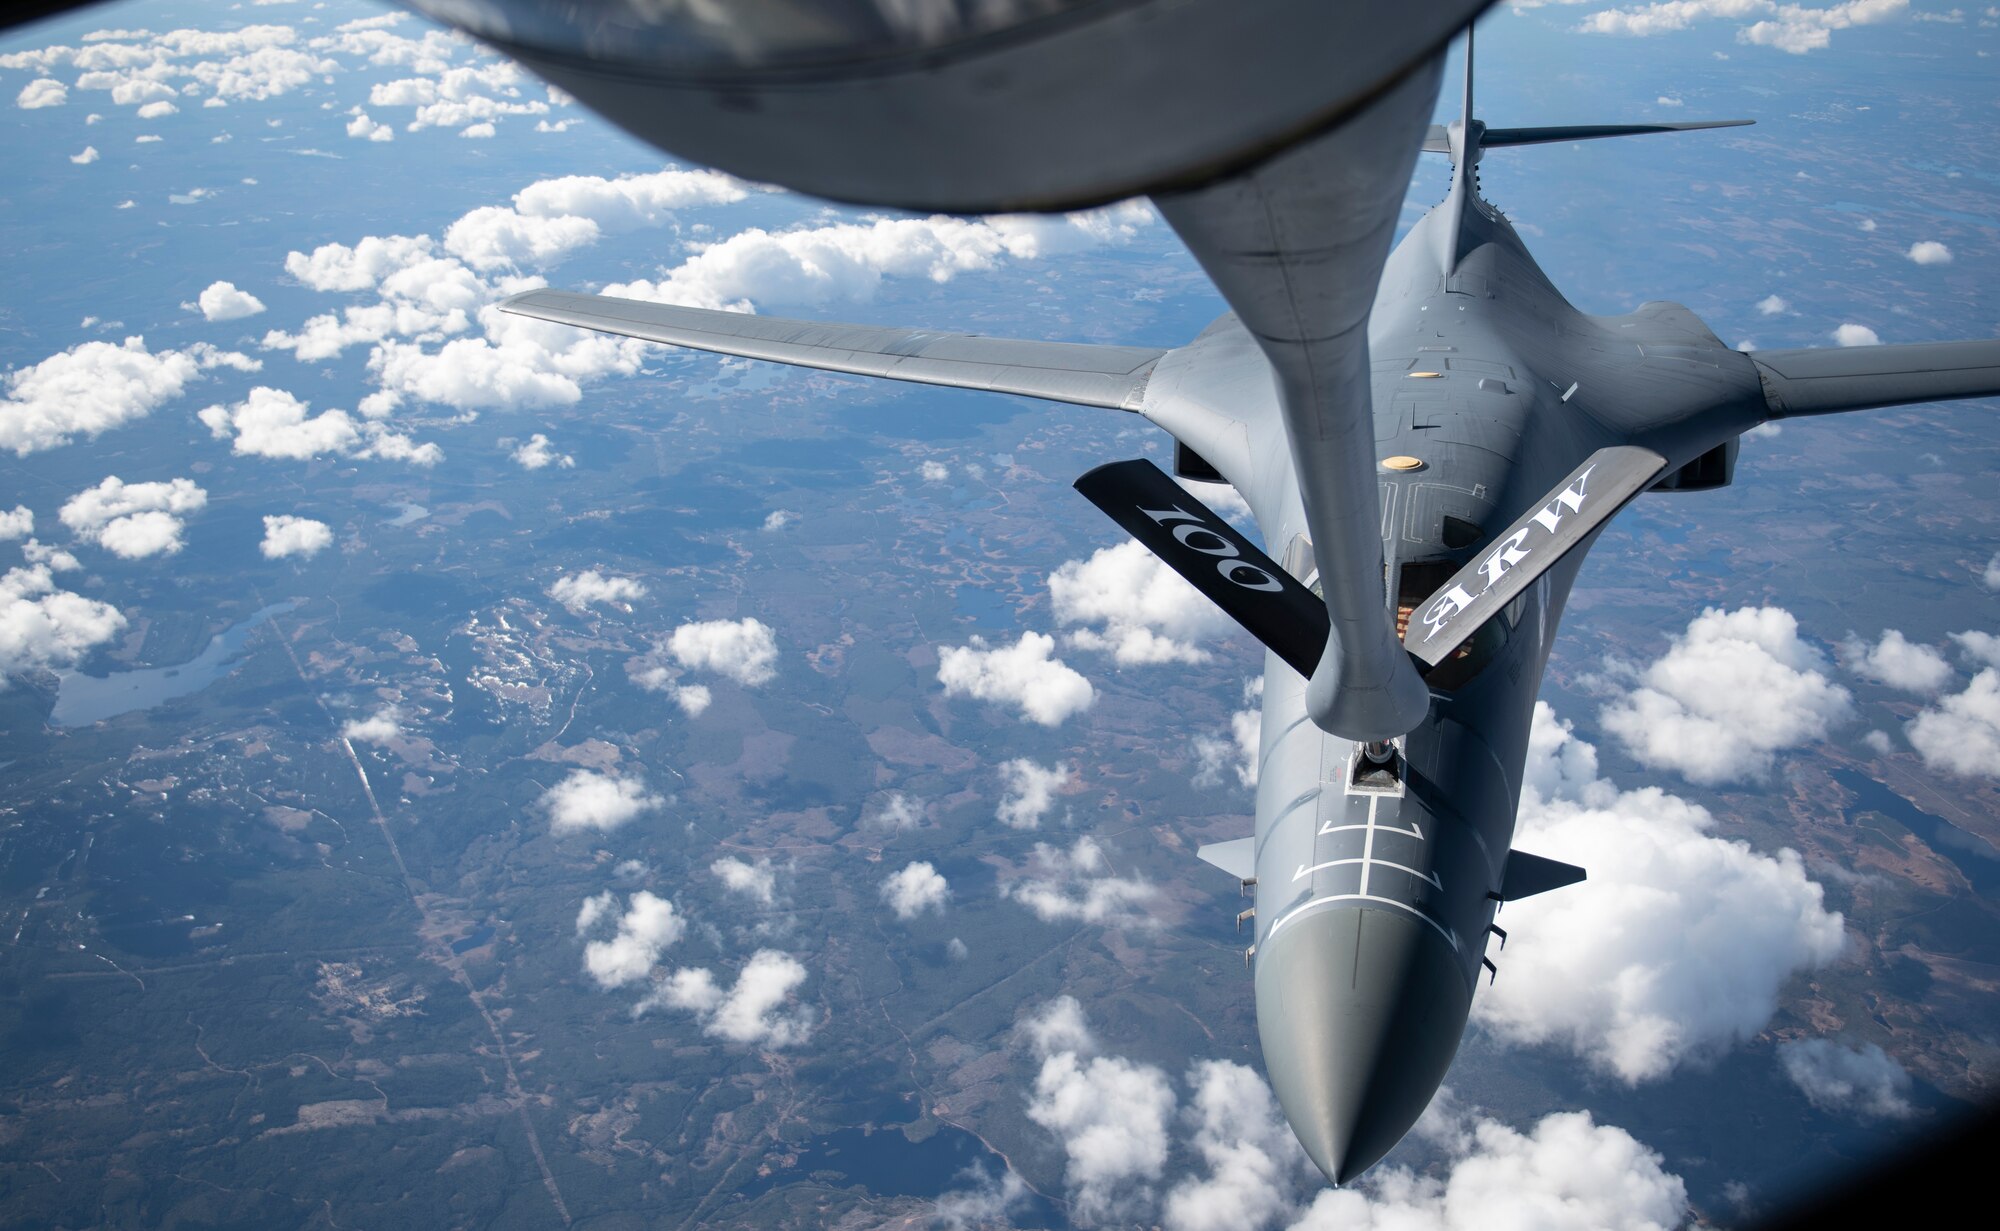 A B-1B Lancer from the 28th Bomb Wing, Ellsworth Air Force Base, South Dakota, receives fuel from a KC-135 Stratotanker from the 100th Air Refueling Wing, RAF Mildenhall, England, during a Bomber Task Force Europe mission over Sweden, May 20, 2020. The mission marked the first time B-1s have flown over Sweden to integrate with Swedish Gripens while conducting close-air support training with Swedish Joint Terminal Attack Controller ground teams at Vidsel Range. (U.S. Air Force photo by Tech. Sgt. Emerson Nuñez)